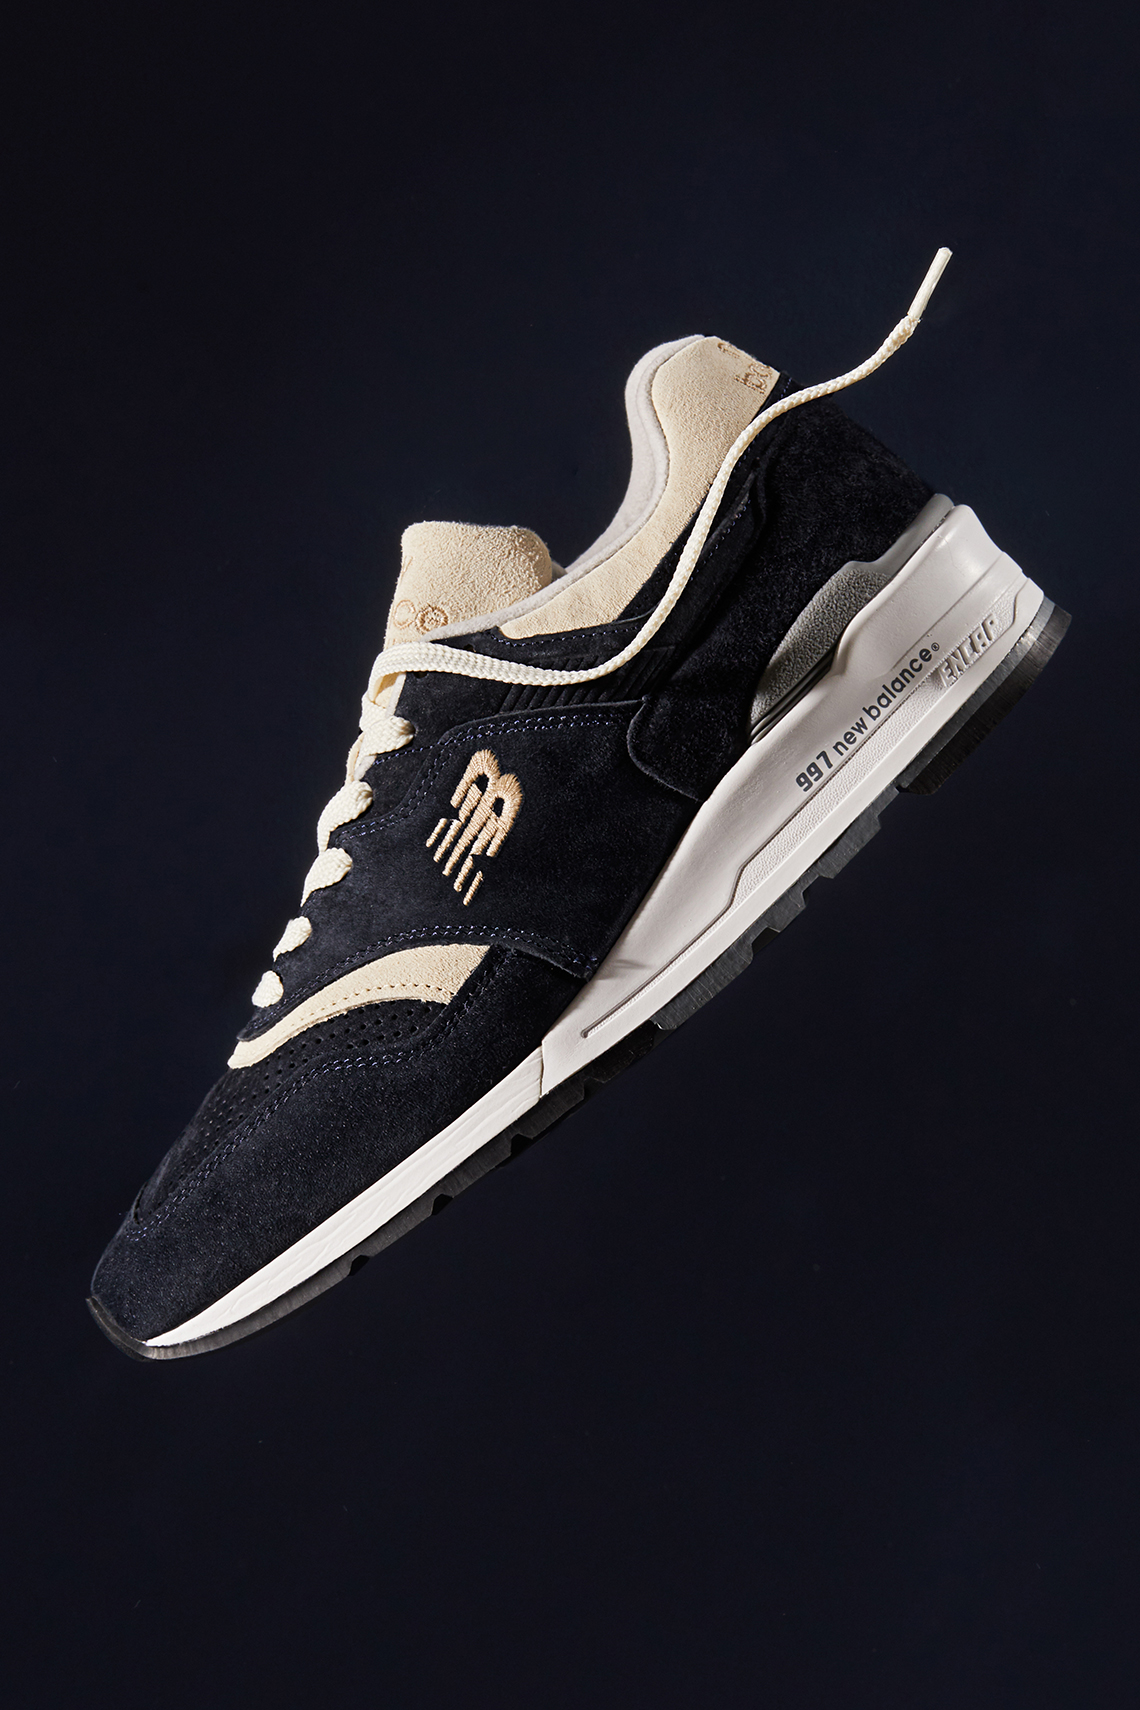 Todd Snyder stone island new balance rc elite_si release date Triborough Navy 3